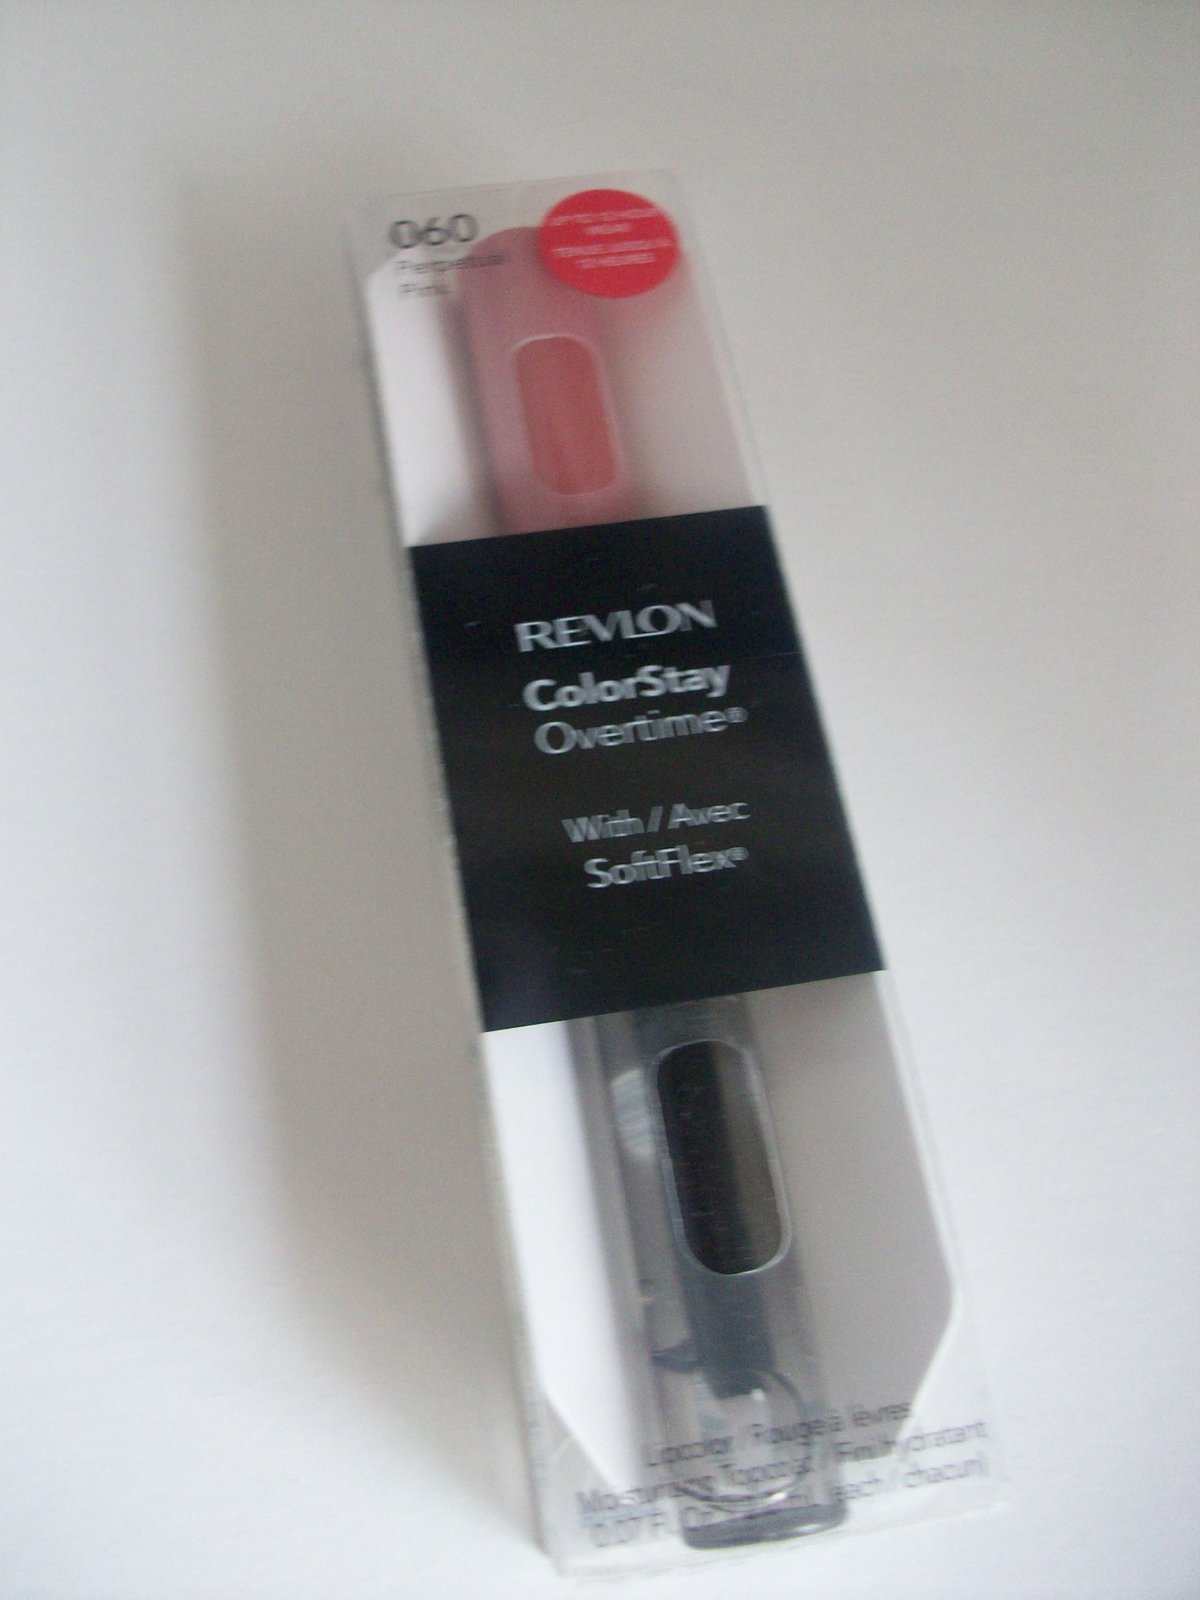 Revlon Colorstay Overtime Lipcolor, Perpetual Pink, 0.135 Ounce - $19.59